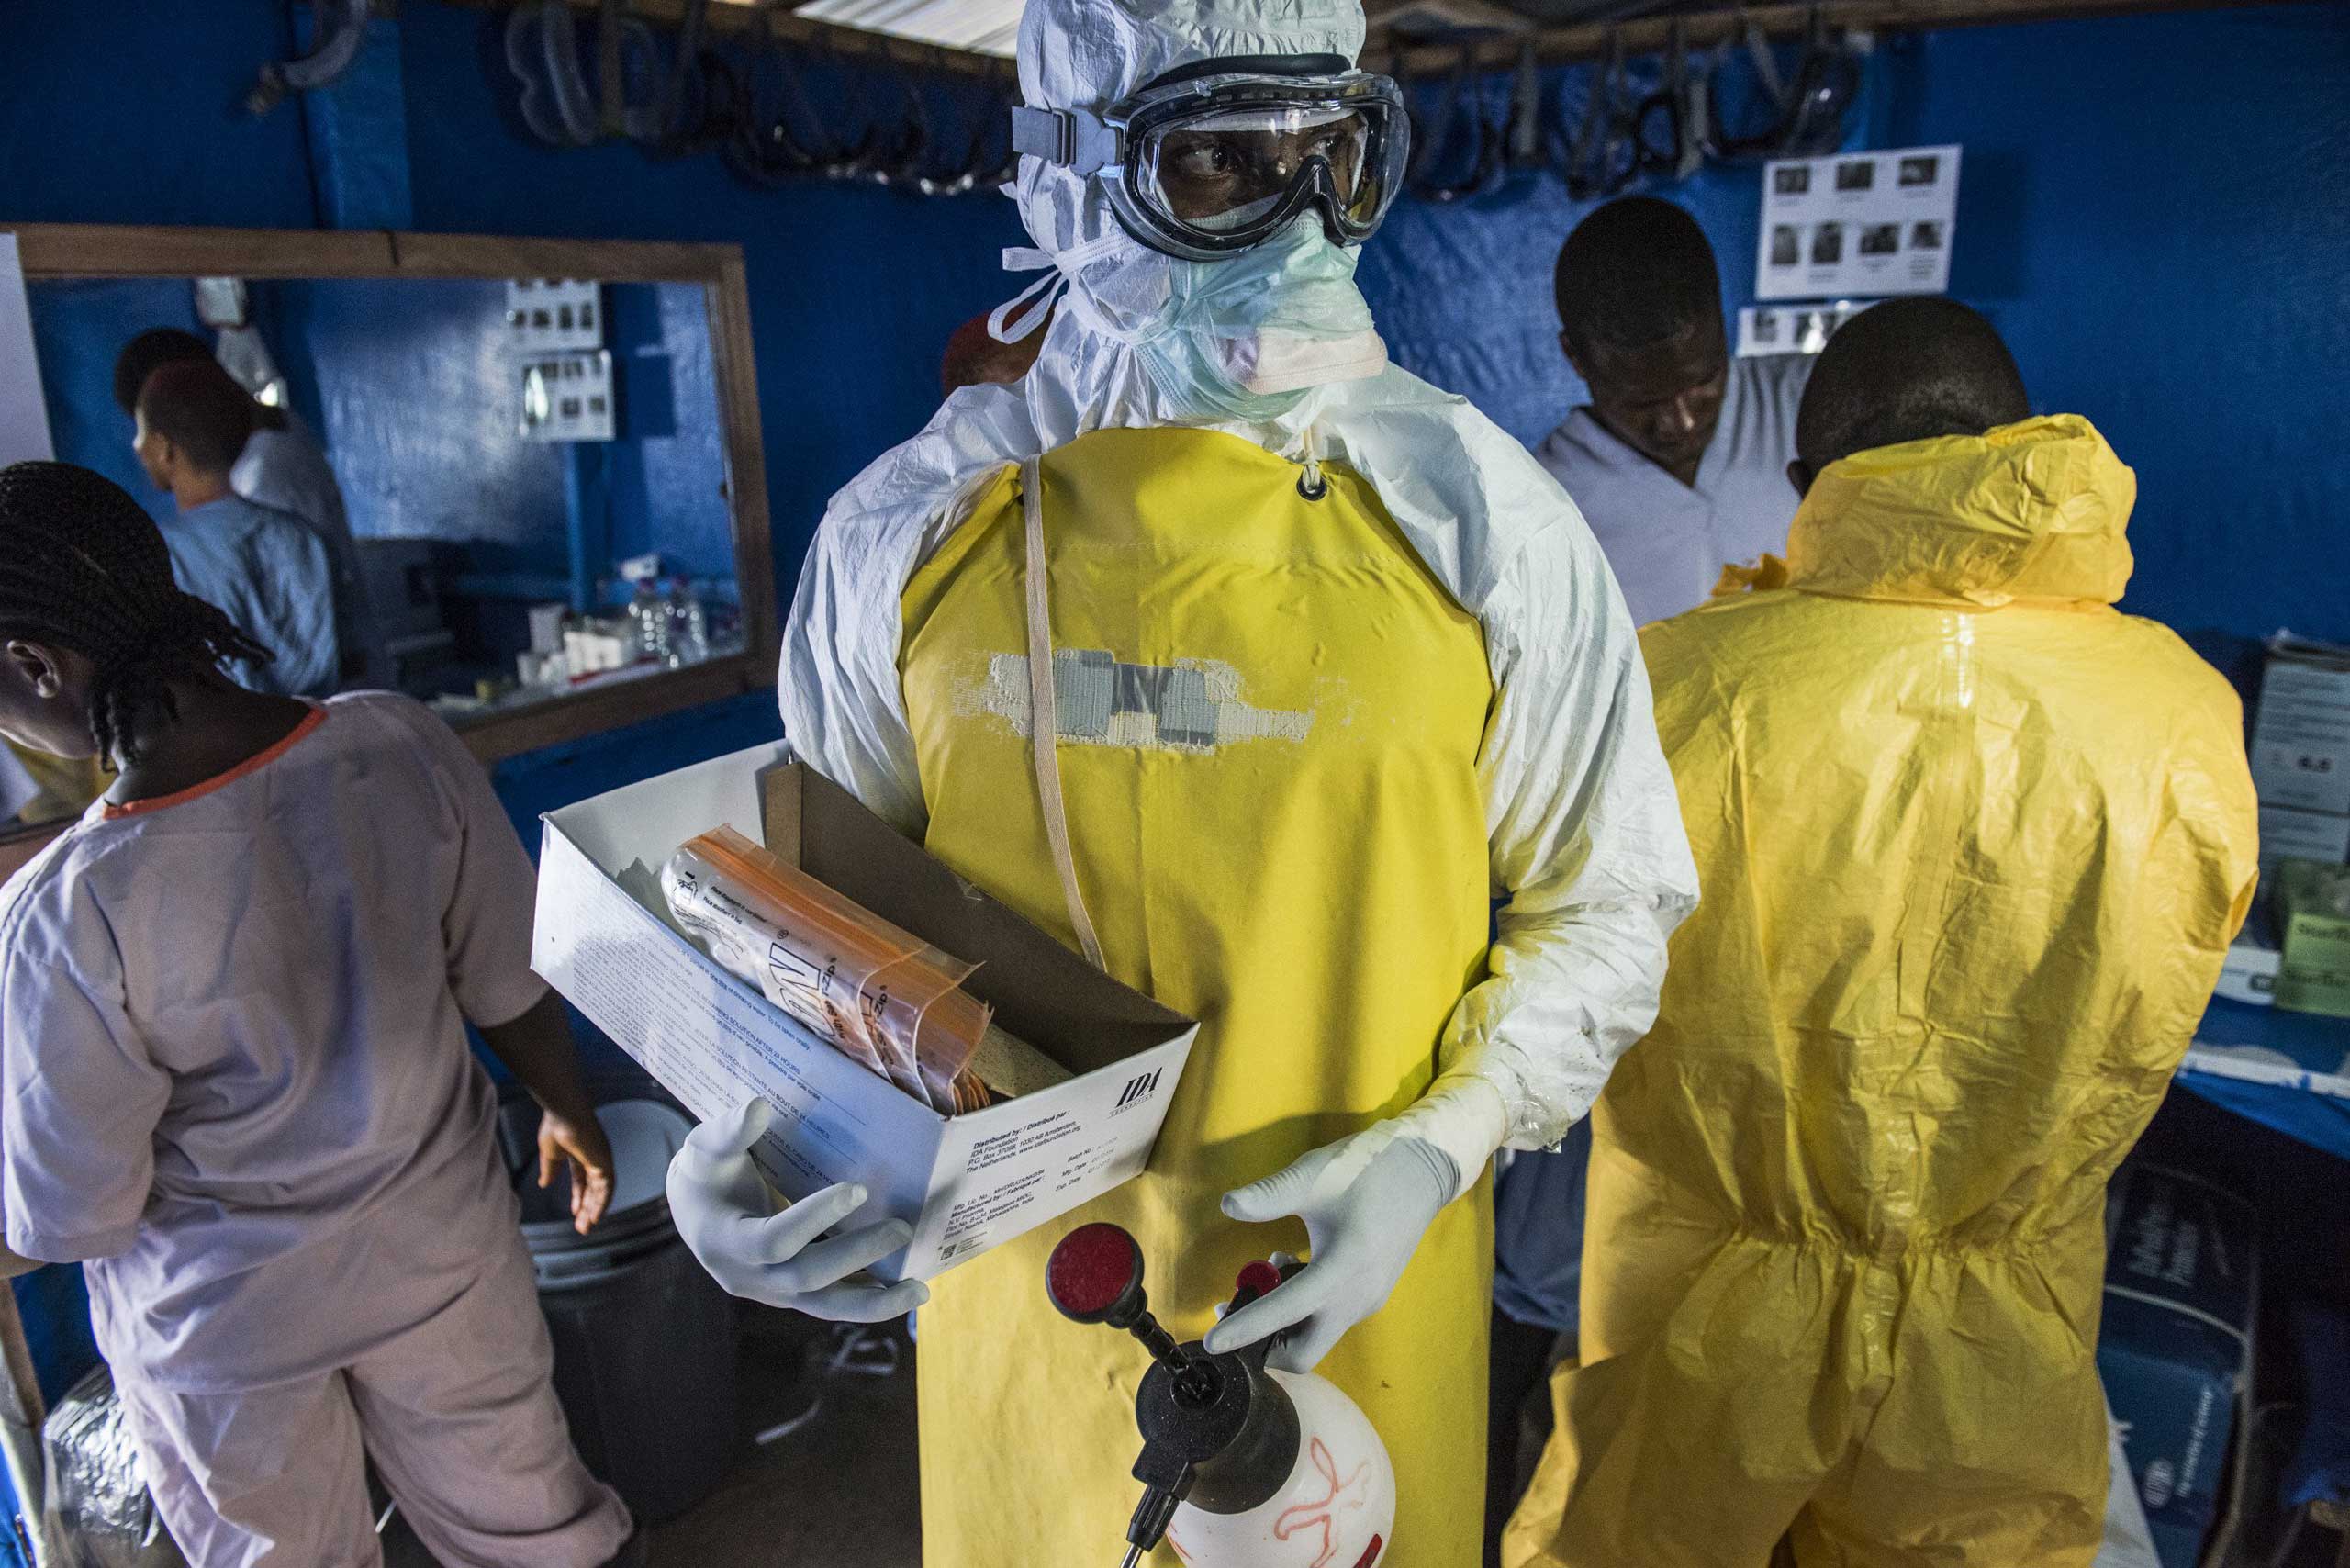 A health worker in protective gear carries empty blood sample kits at the Bong County Ebola treatment center in Suakoko, Liberia, Oct. 19, 2014. (Daniel Berehulak—Redux/The New York Times)